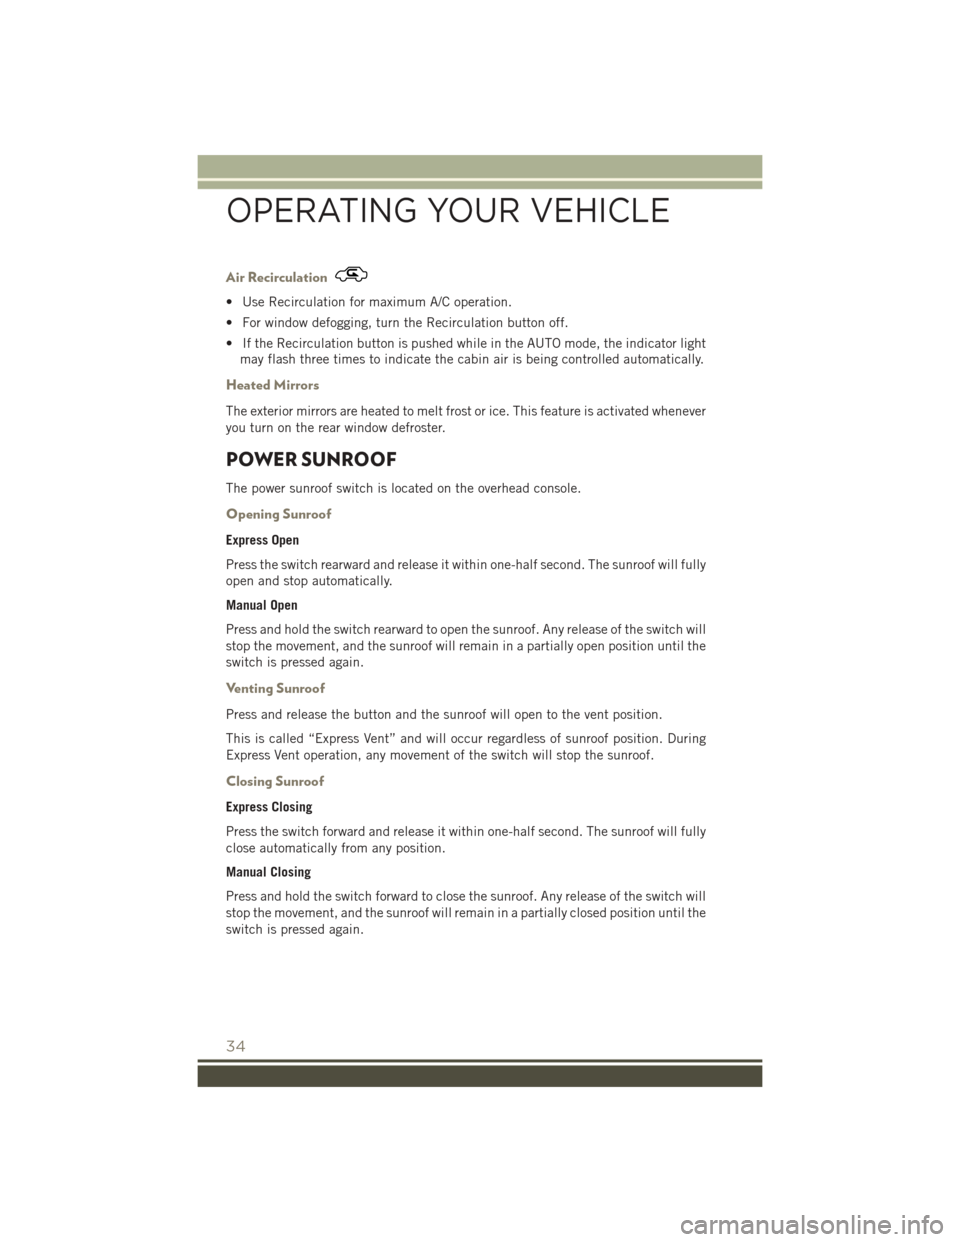 JEEP PATRIOT 2015 1.G User Guide Air Recirculation
• Use Recirculation for maximum A/C operation.
• For window defogging, turn the Recirculation button off.
• If the Recirculation button is pushed while in the AUTO mode, the in